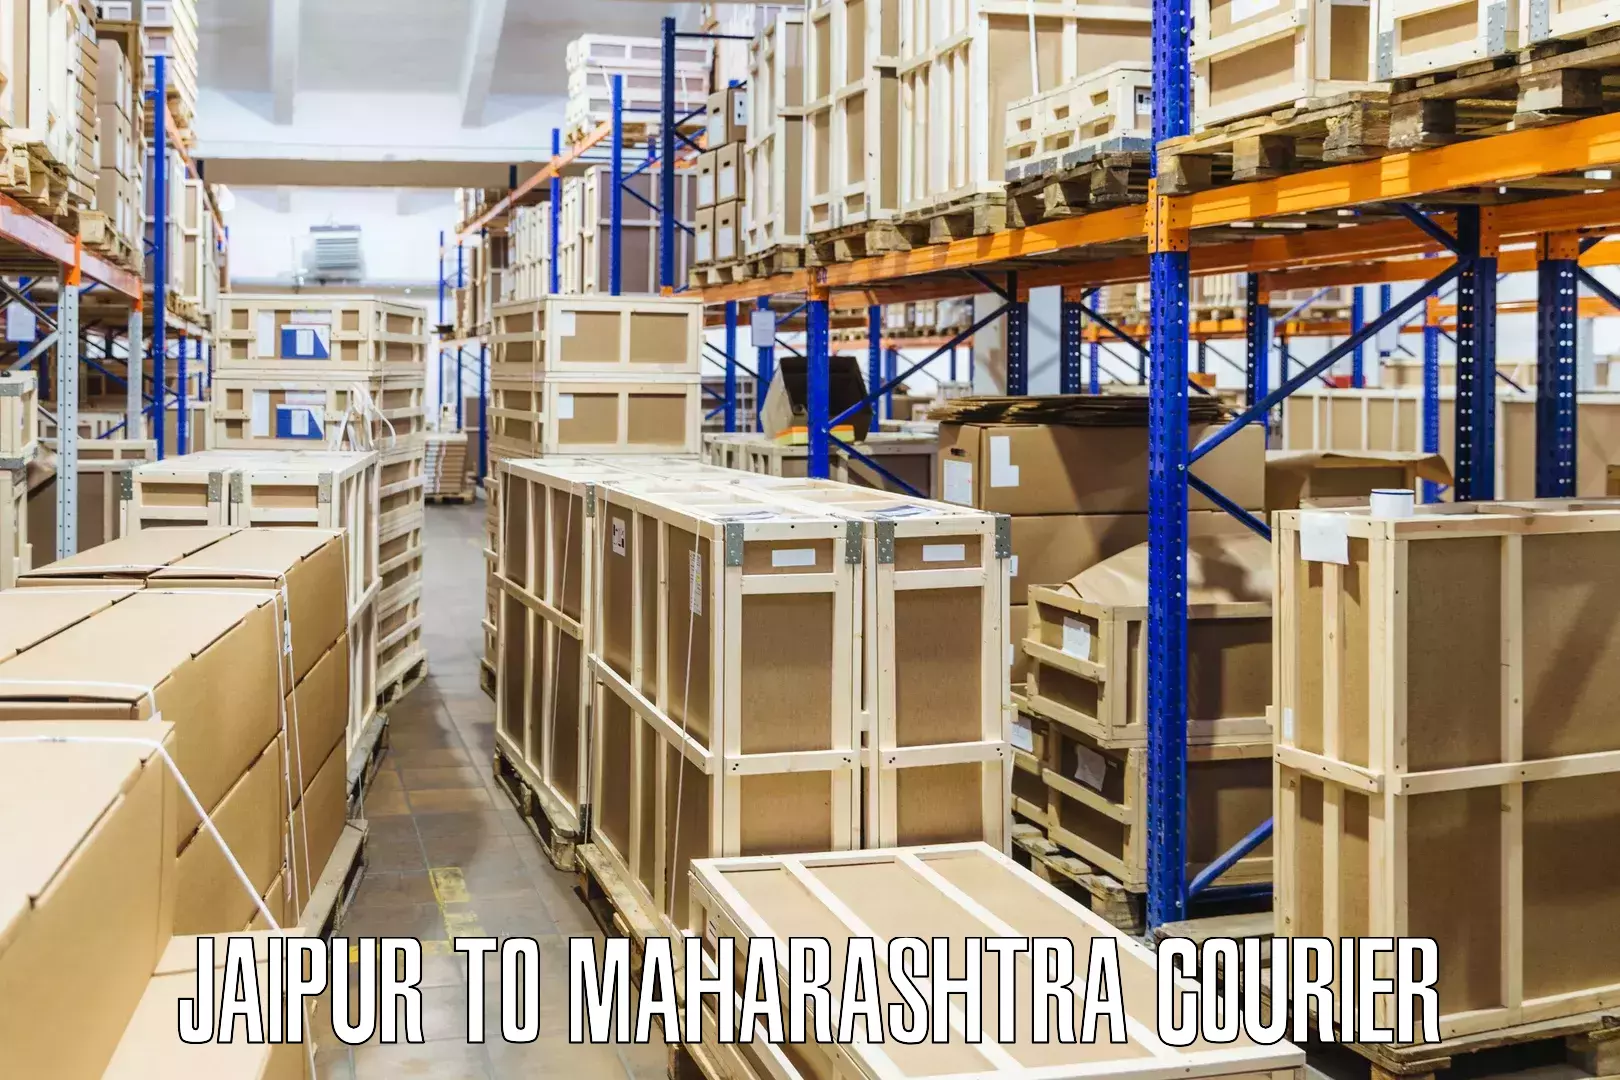 Courier insurance Jaipur to Wardha